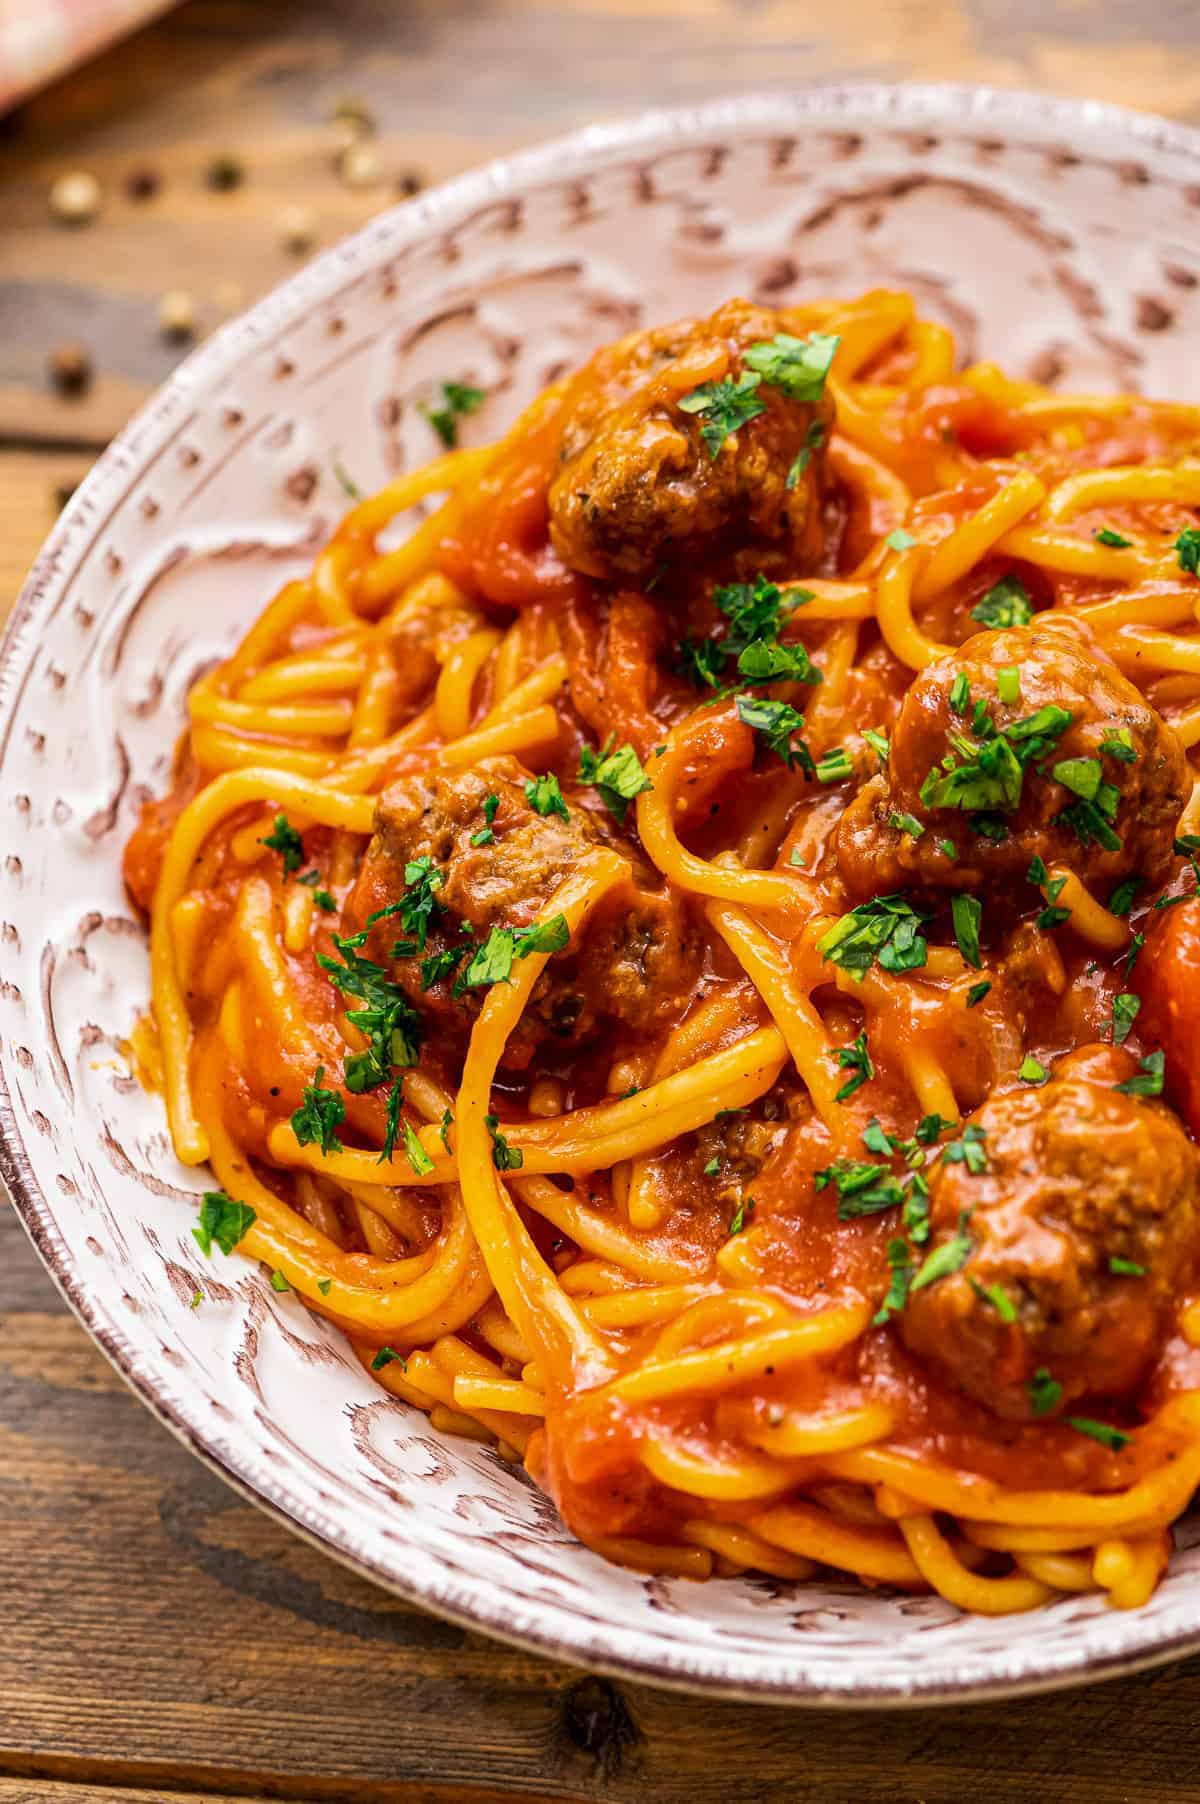 Bowl of spaghetti and meatballs topped with parsely